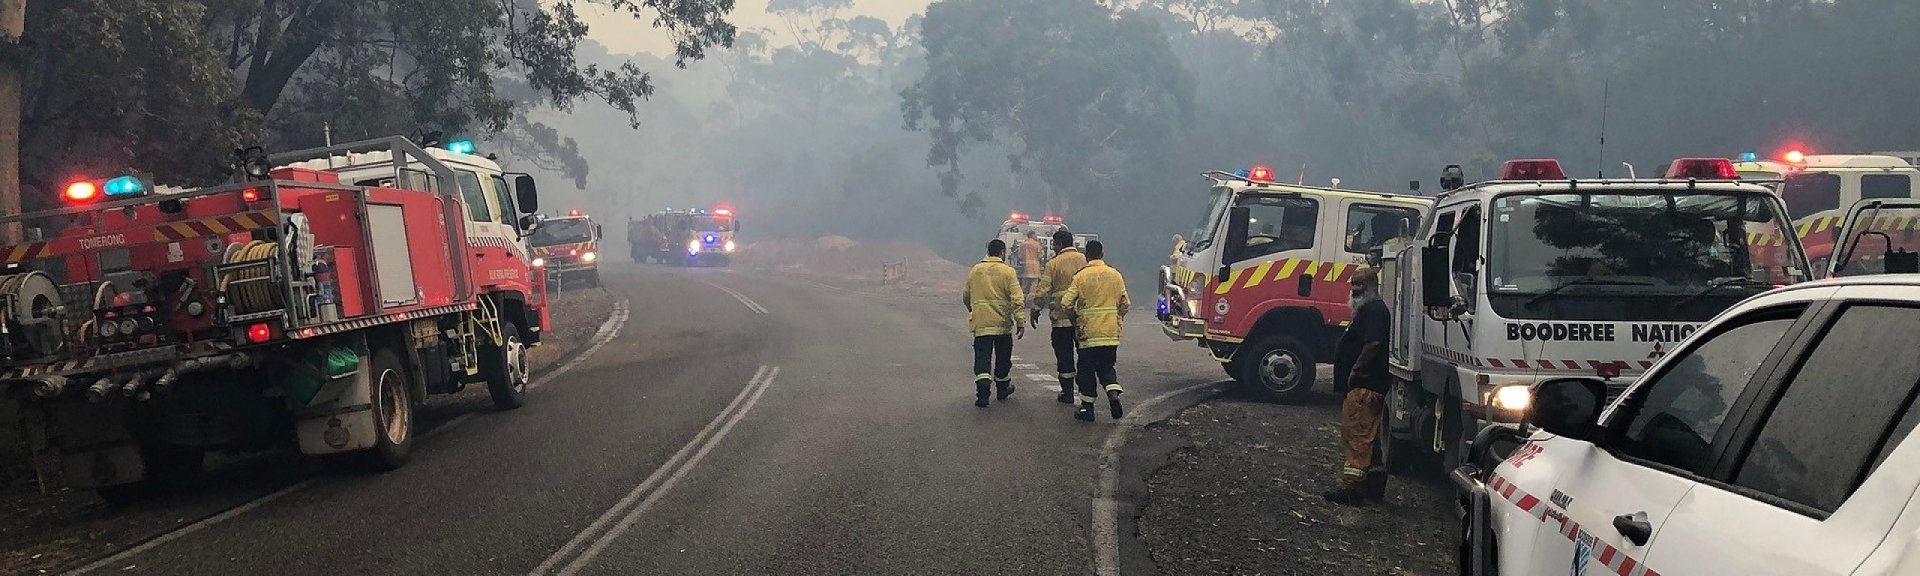 Firefighters at Booderee National Park